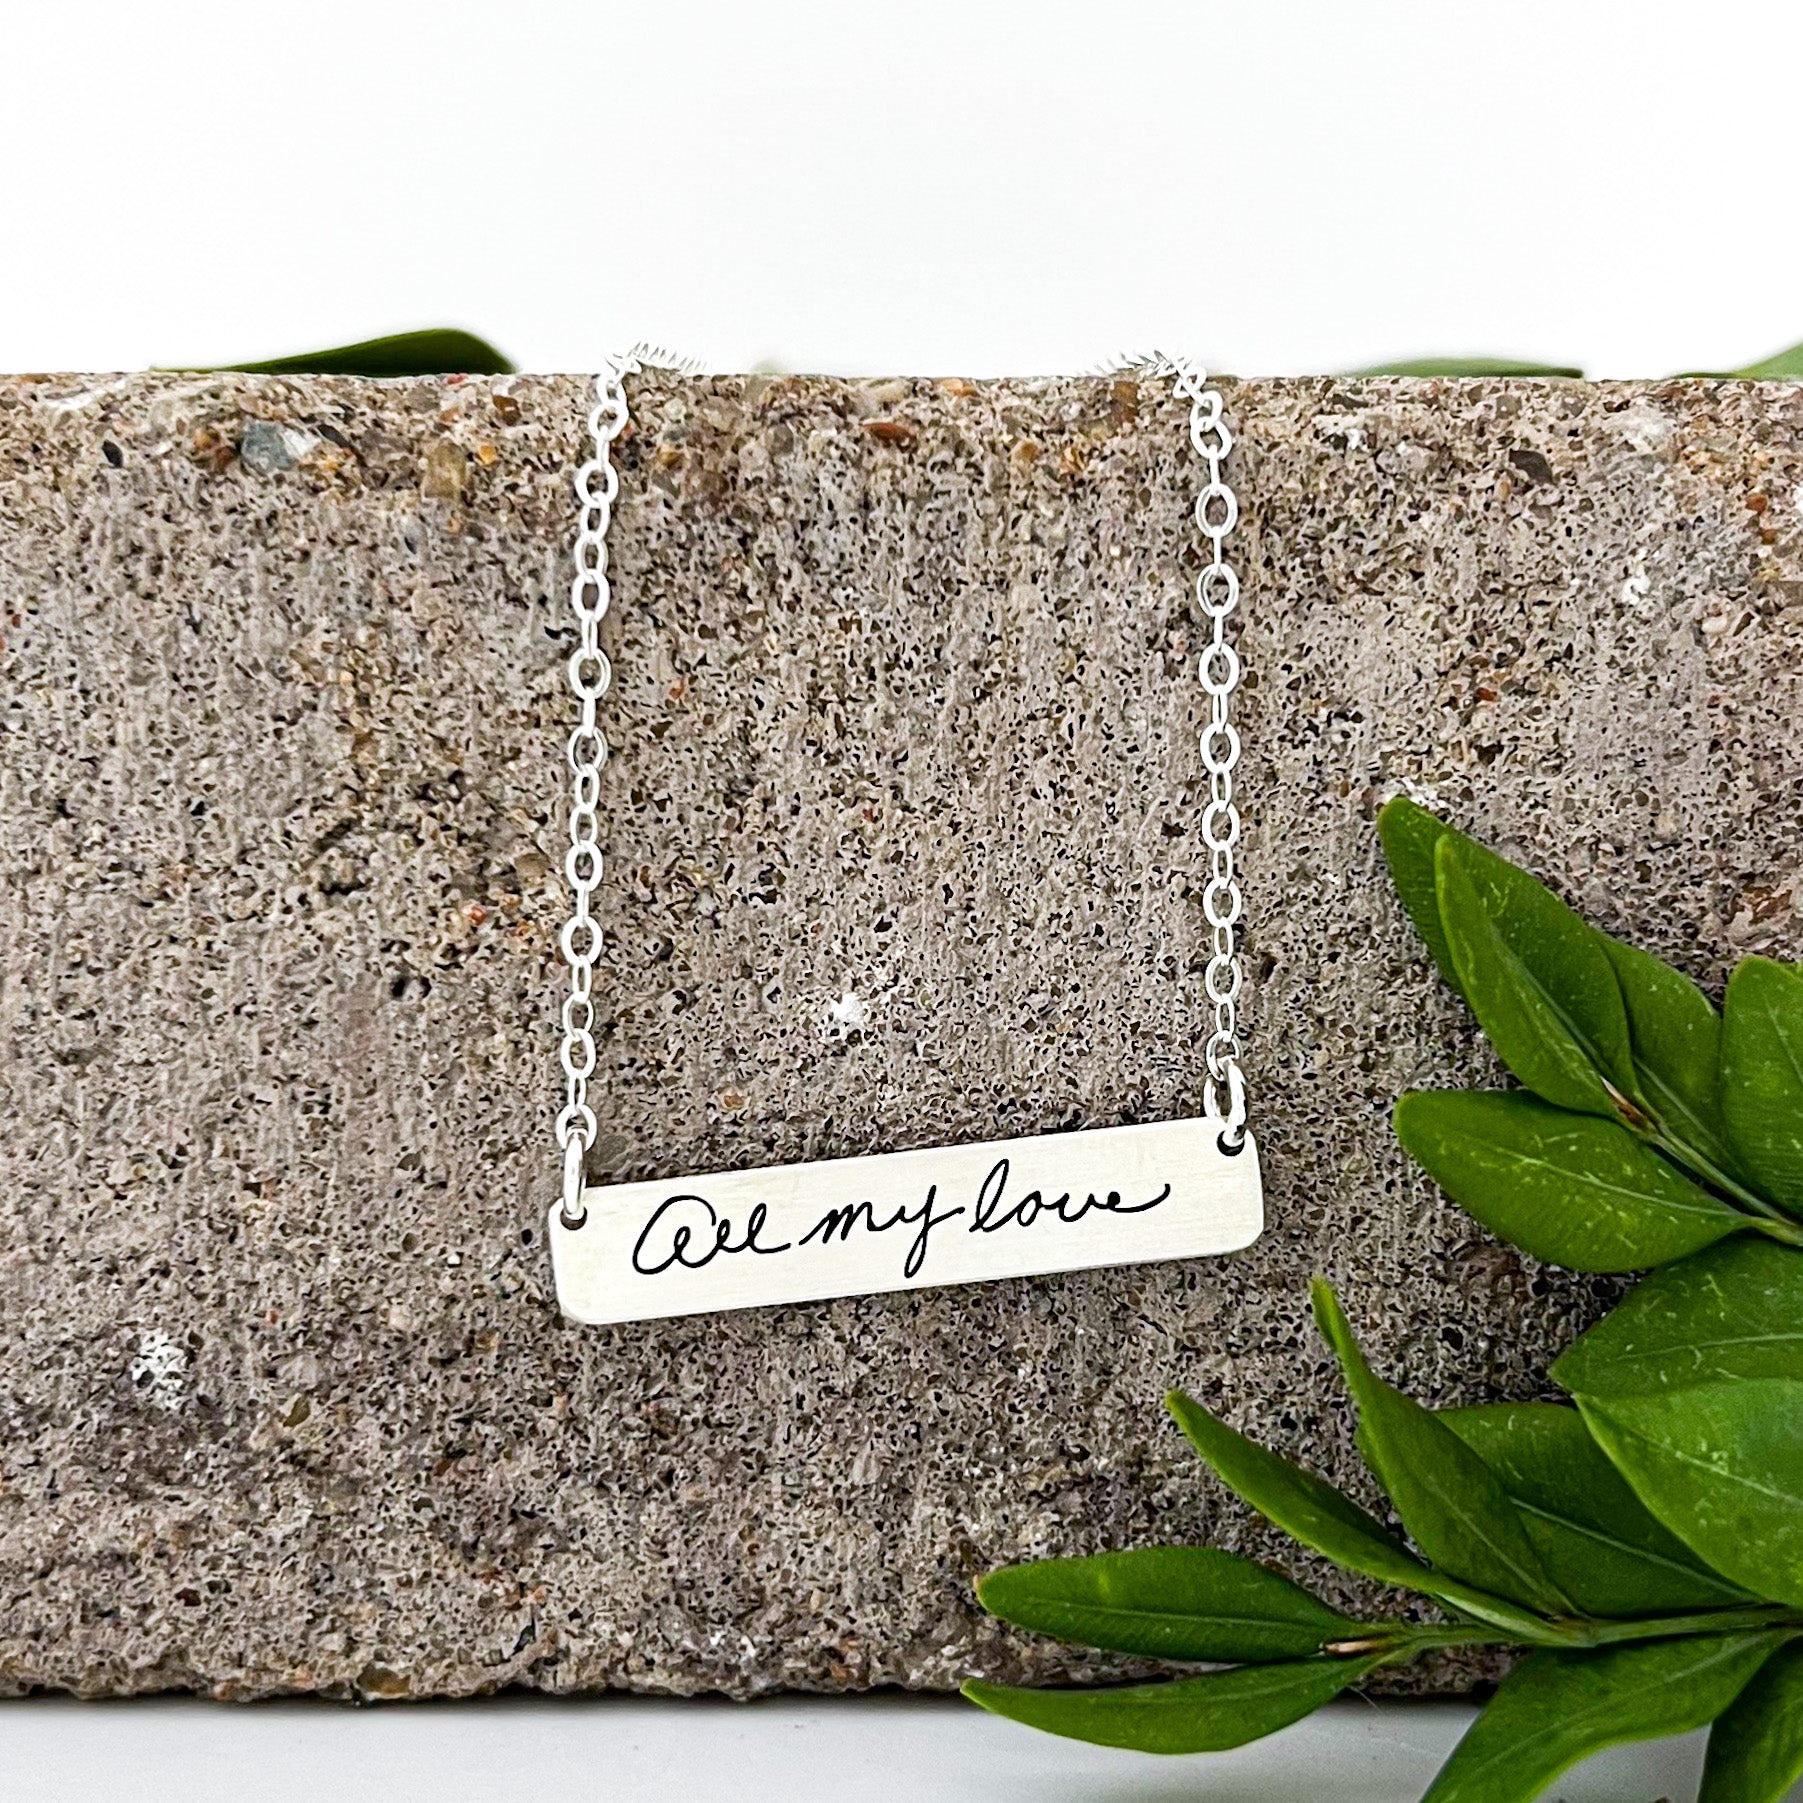 Mia Necklace | Minimal Bar Necklace | Memorial Jewelry Engraved With Your Writing, Fingerprints and Signatures | House of Jaco